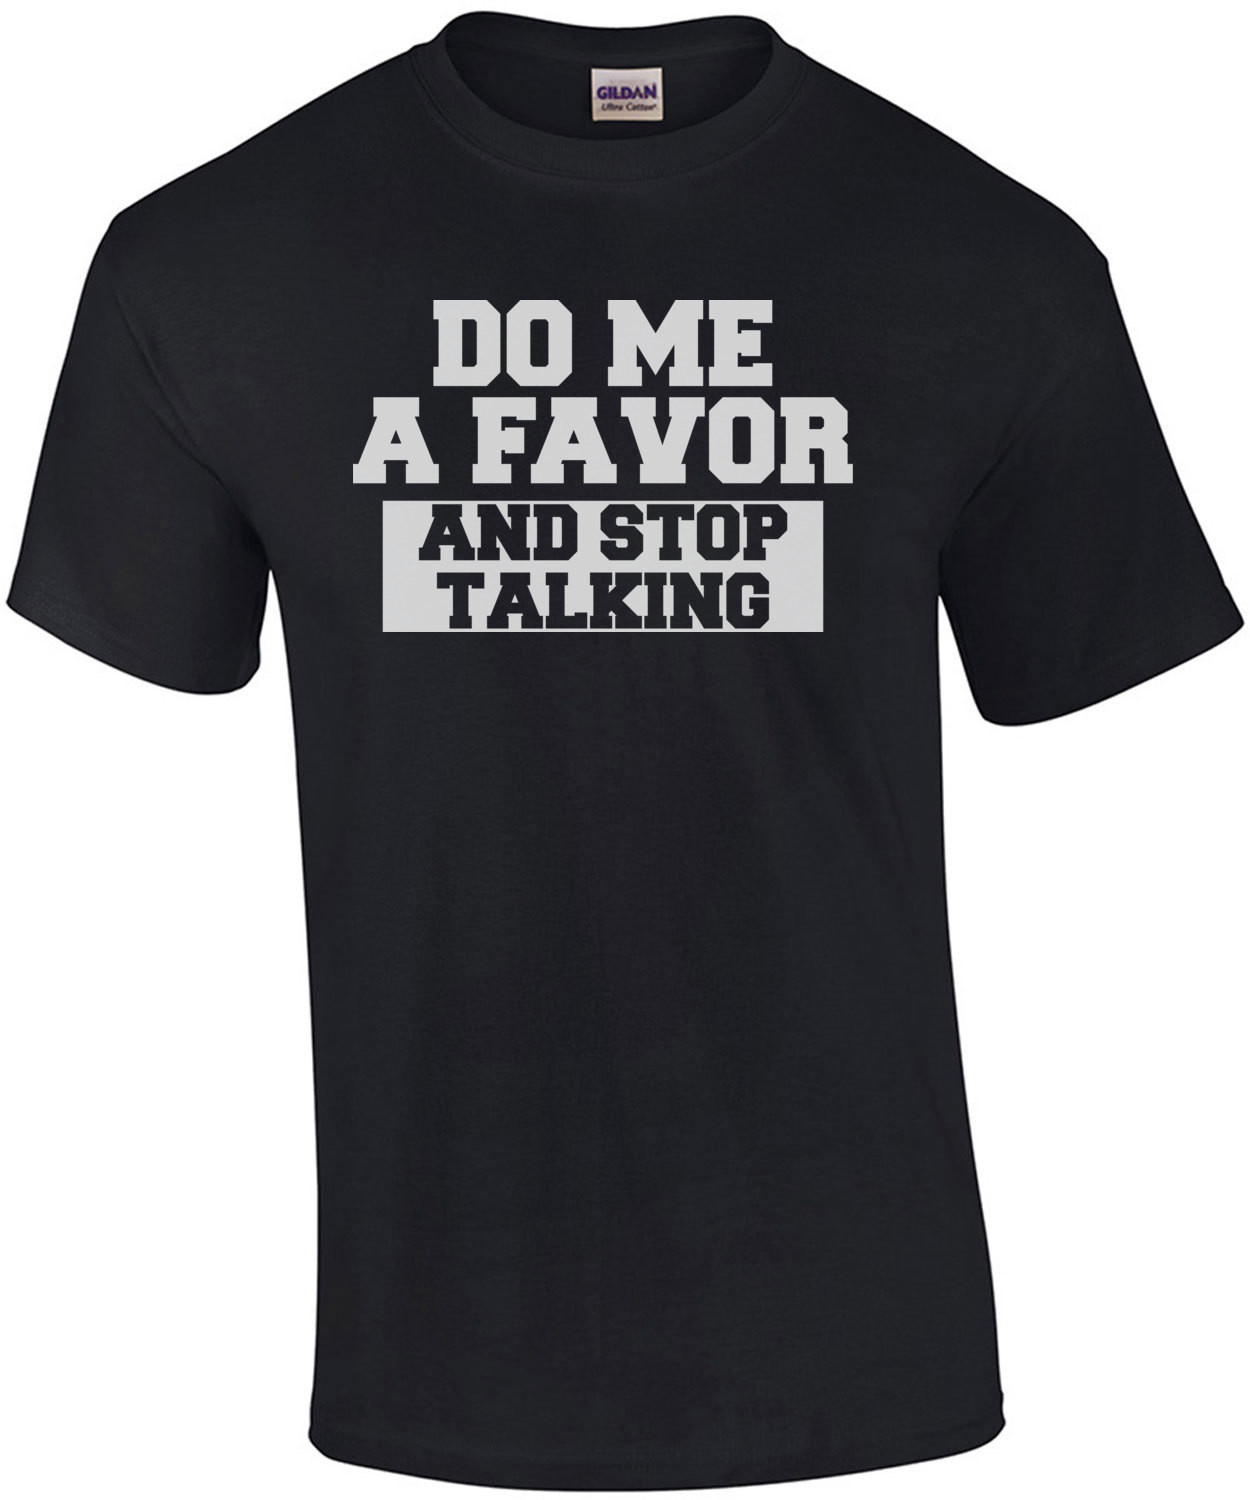 Do Me a Favor And Stop Talking Shirt